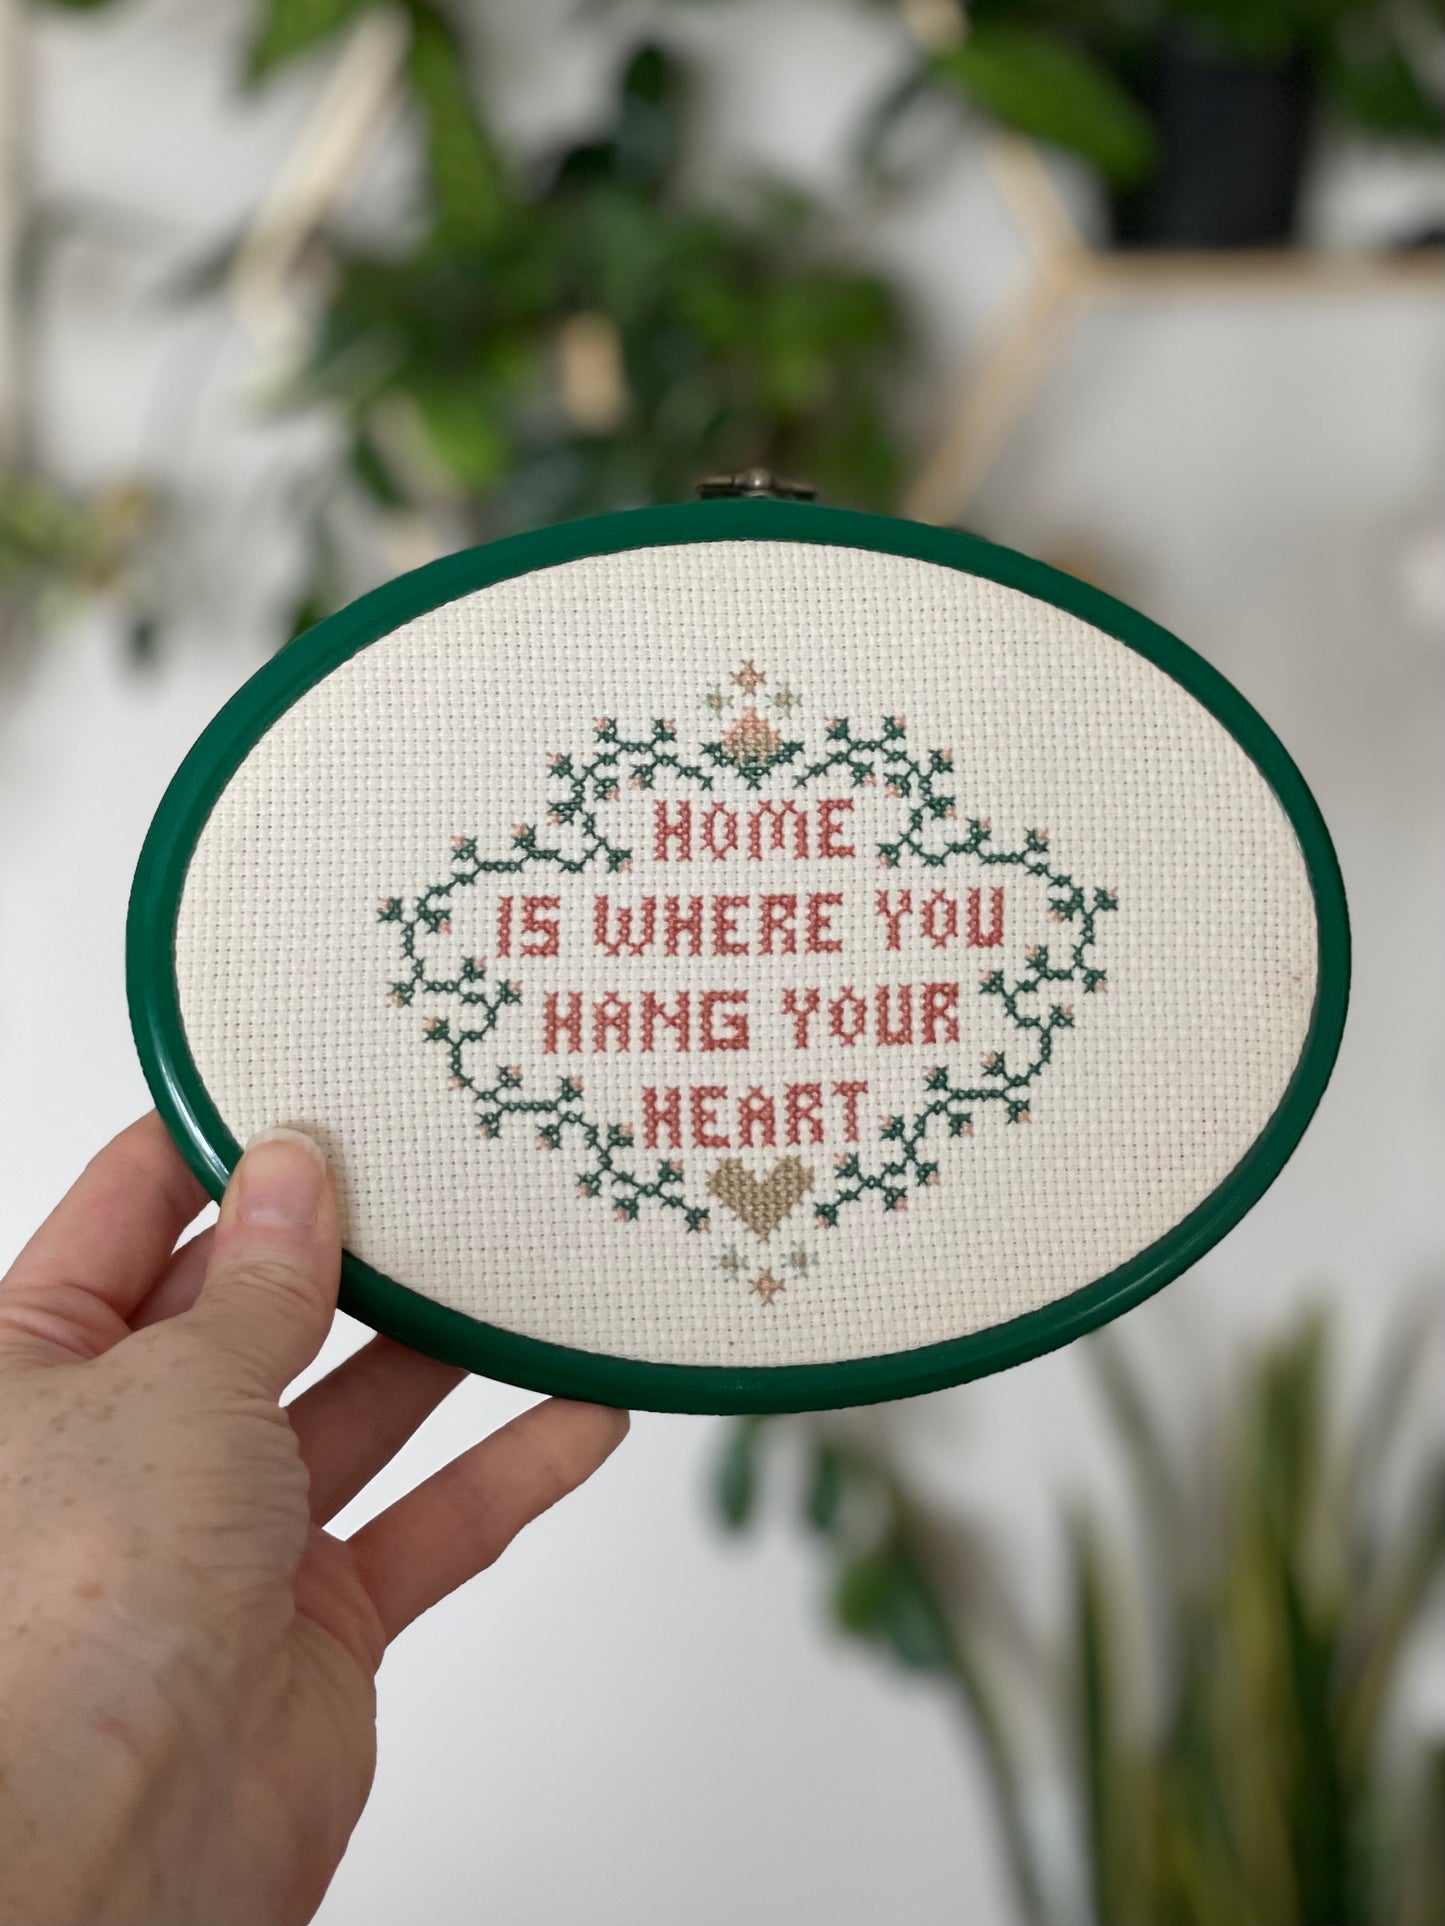 Home is where you hang your heart cross stitch